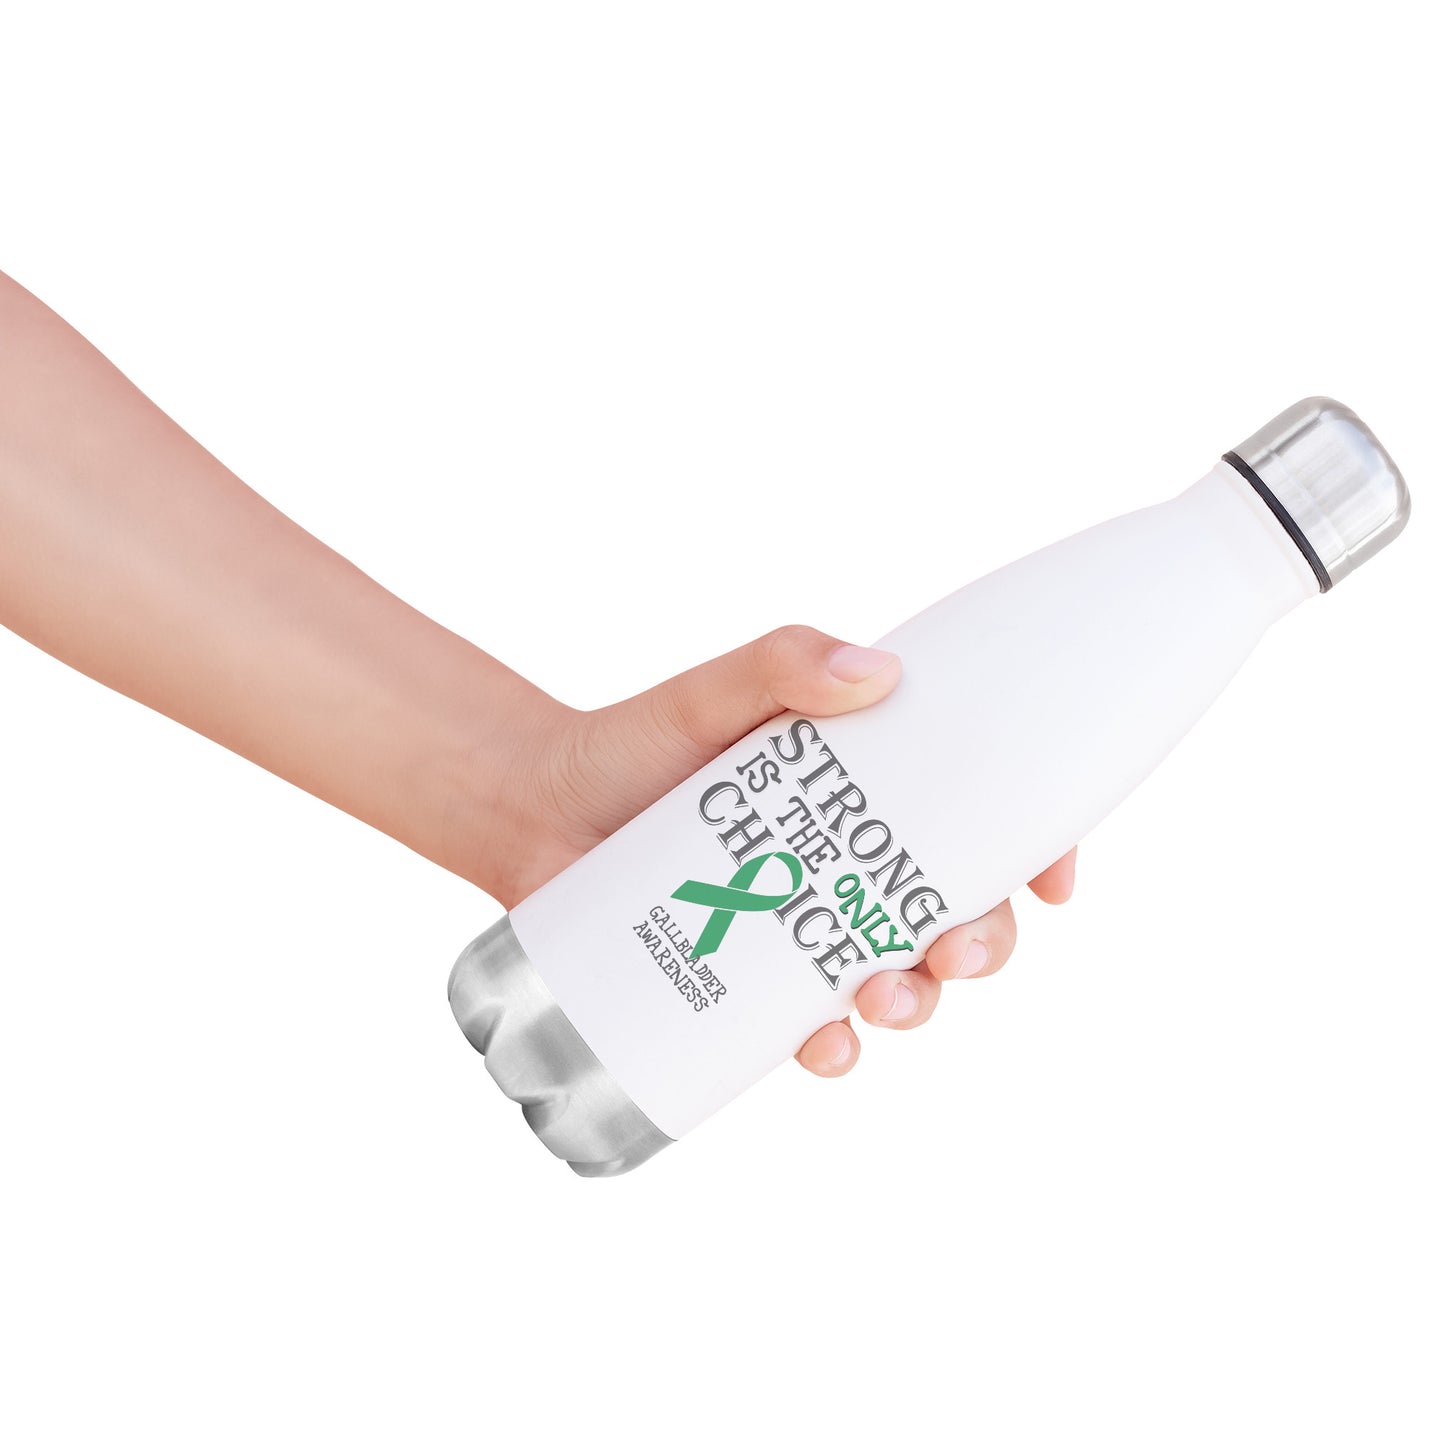 Strong is the Only Choice -Gallbladder Cancer Awareness 20oz Insulated Water Bottle